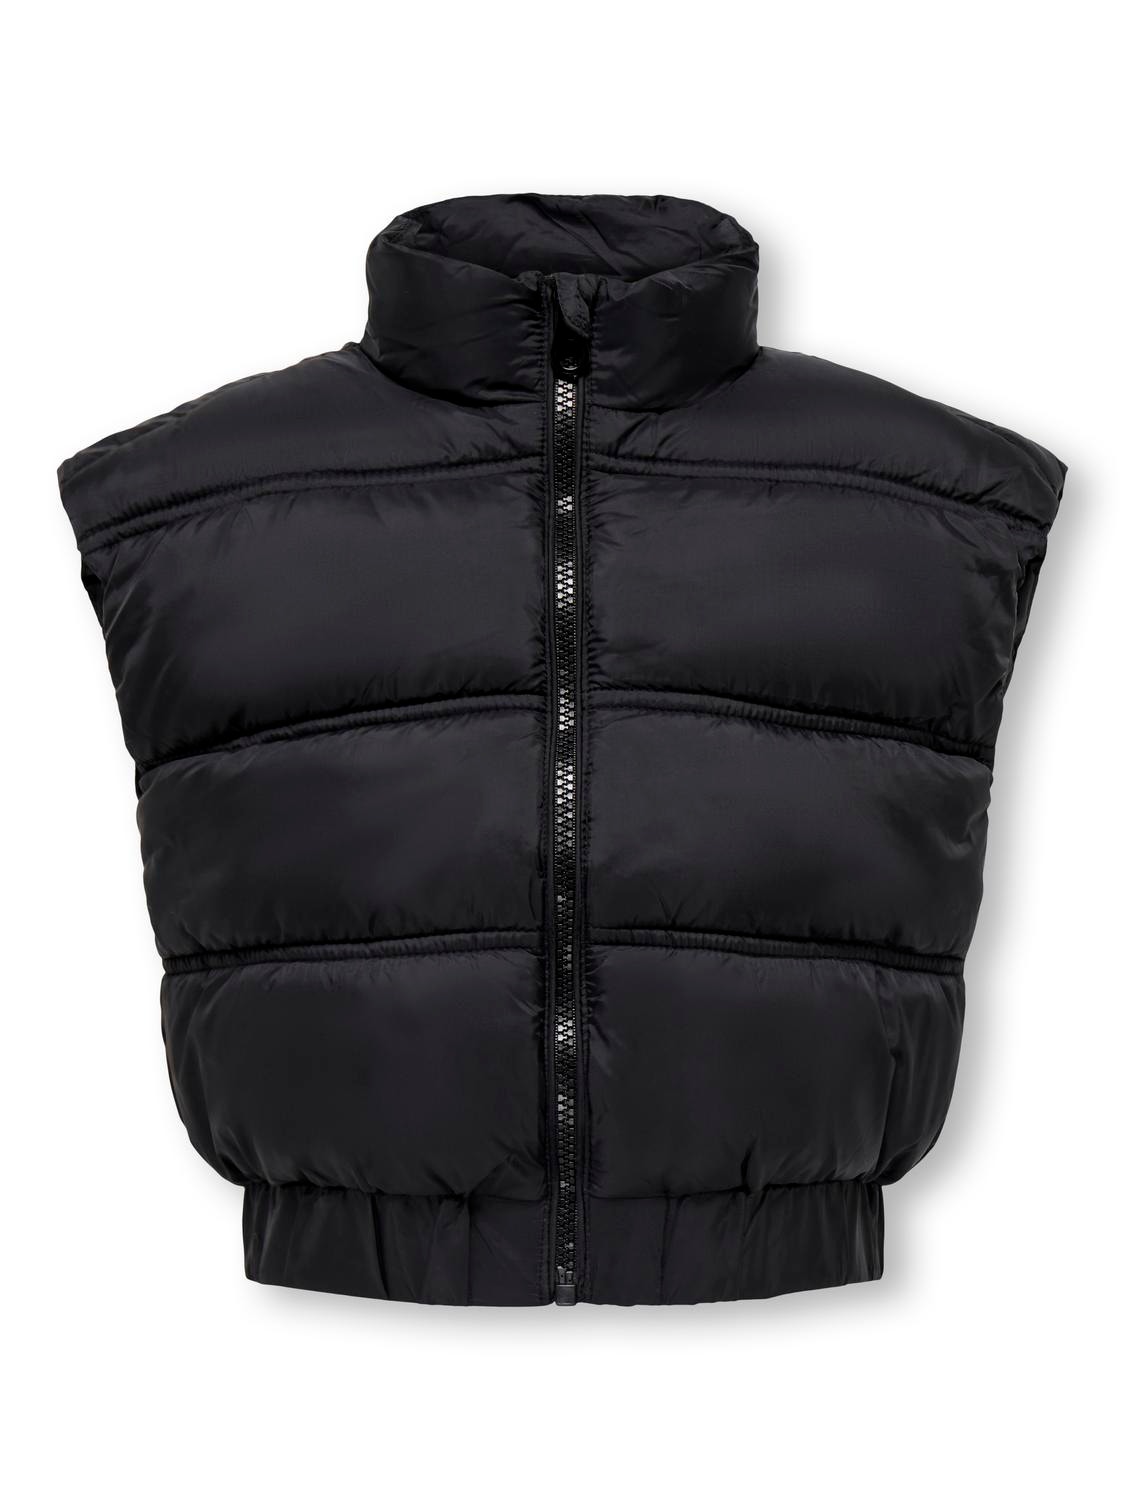 ONLY Gilets anti-froid Col haut -Black - 15276187